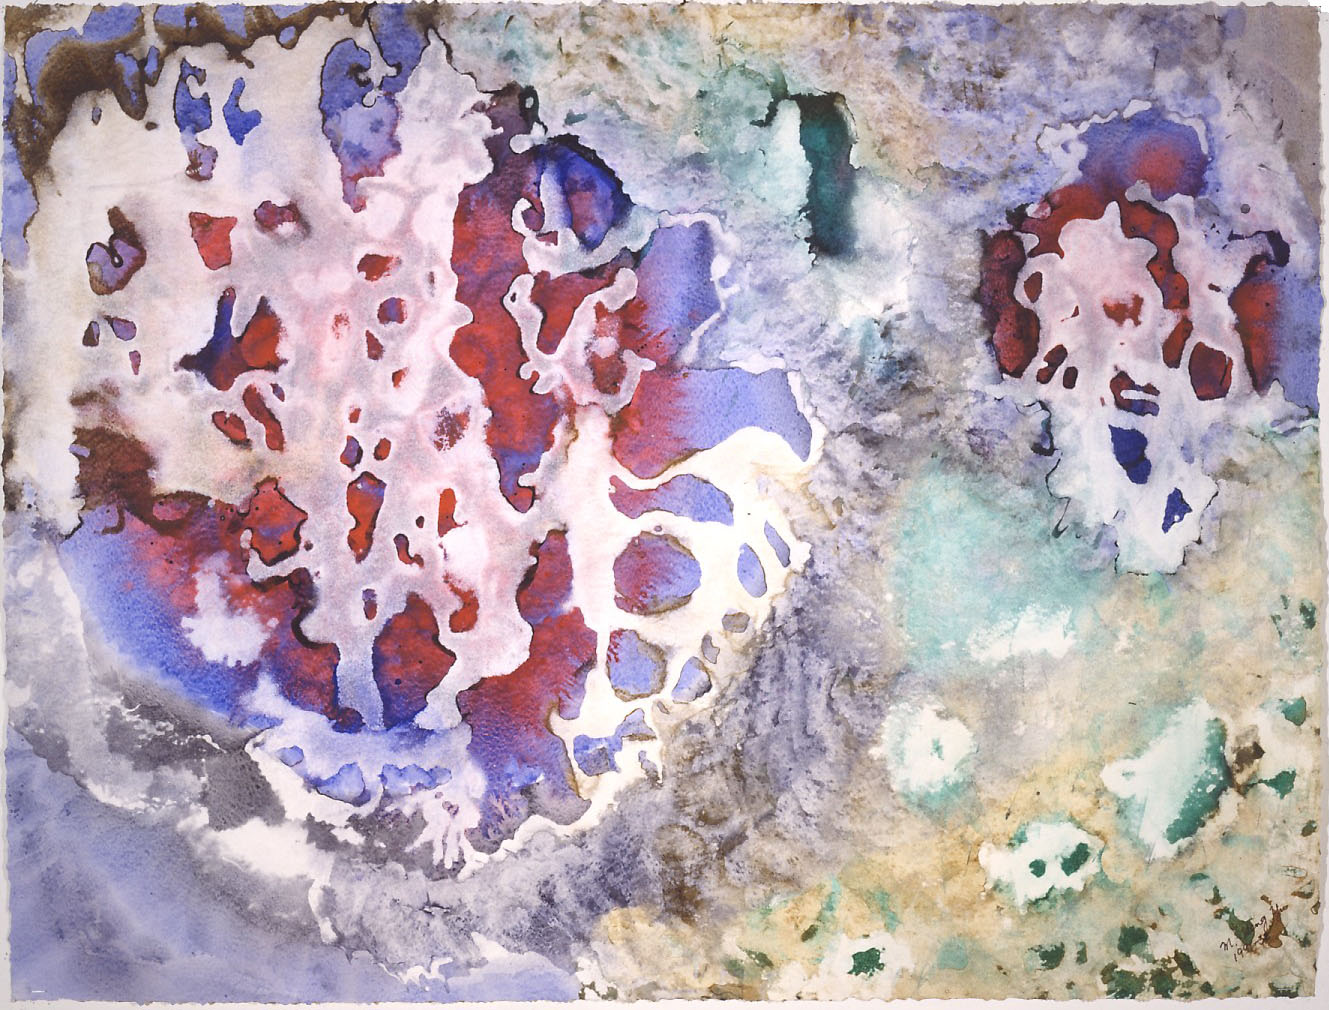  "Dancing Coral" 1991, Dancing Coral Series, acrylic on paper, 32 x 42 in (81 x 107 cm). 